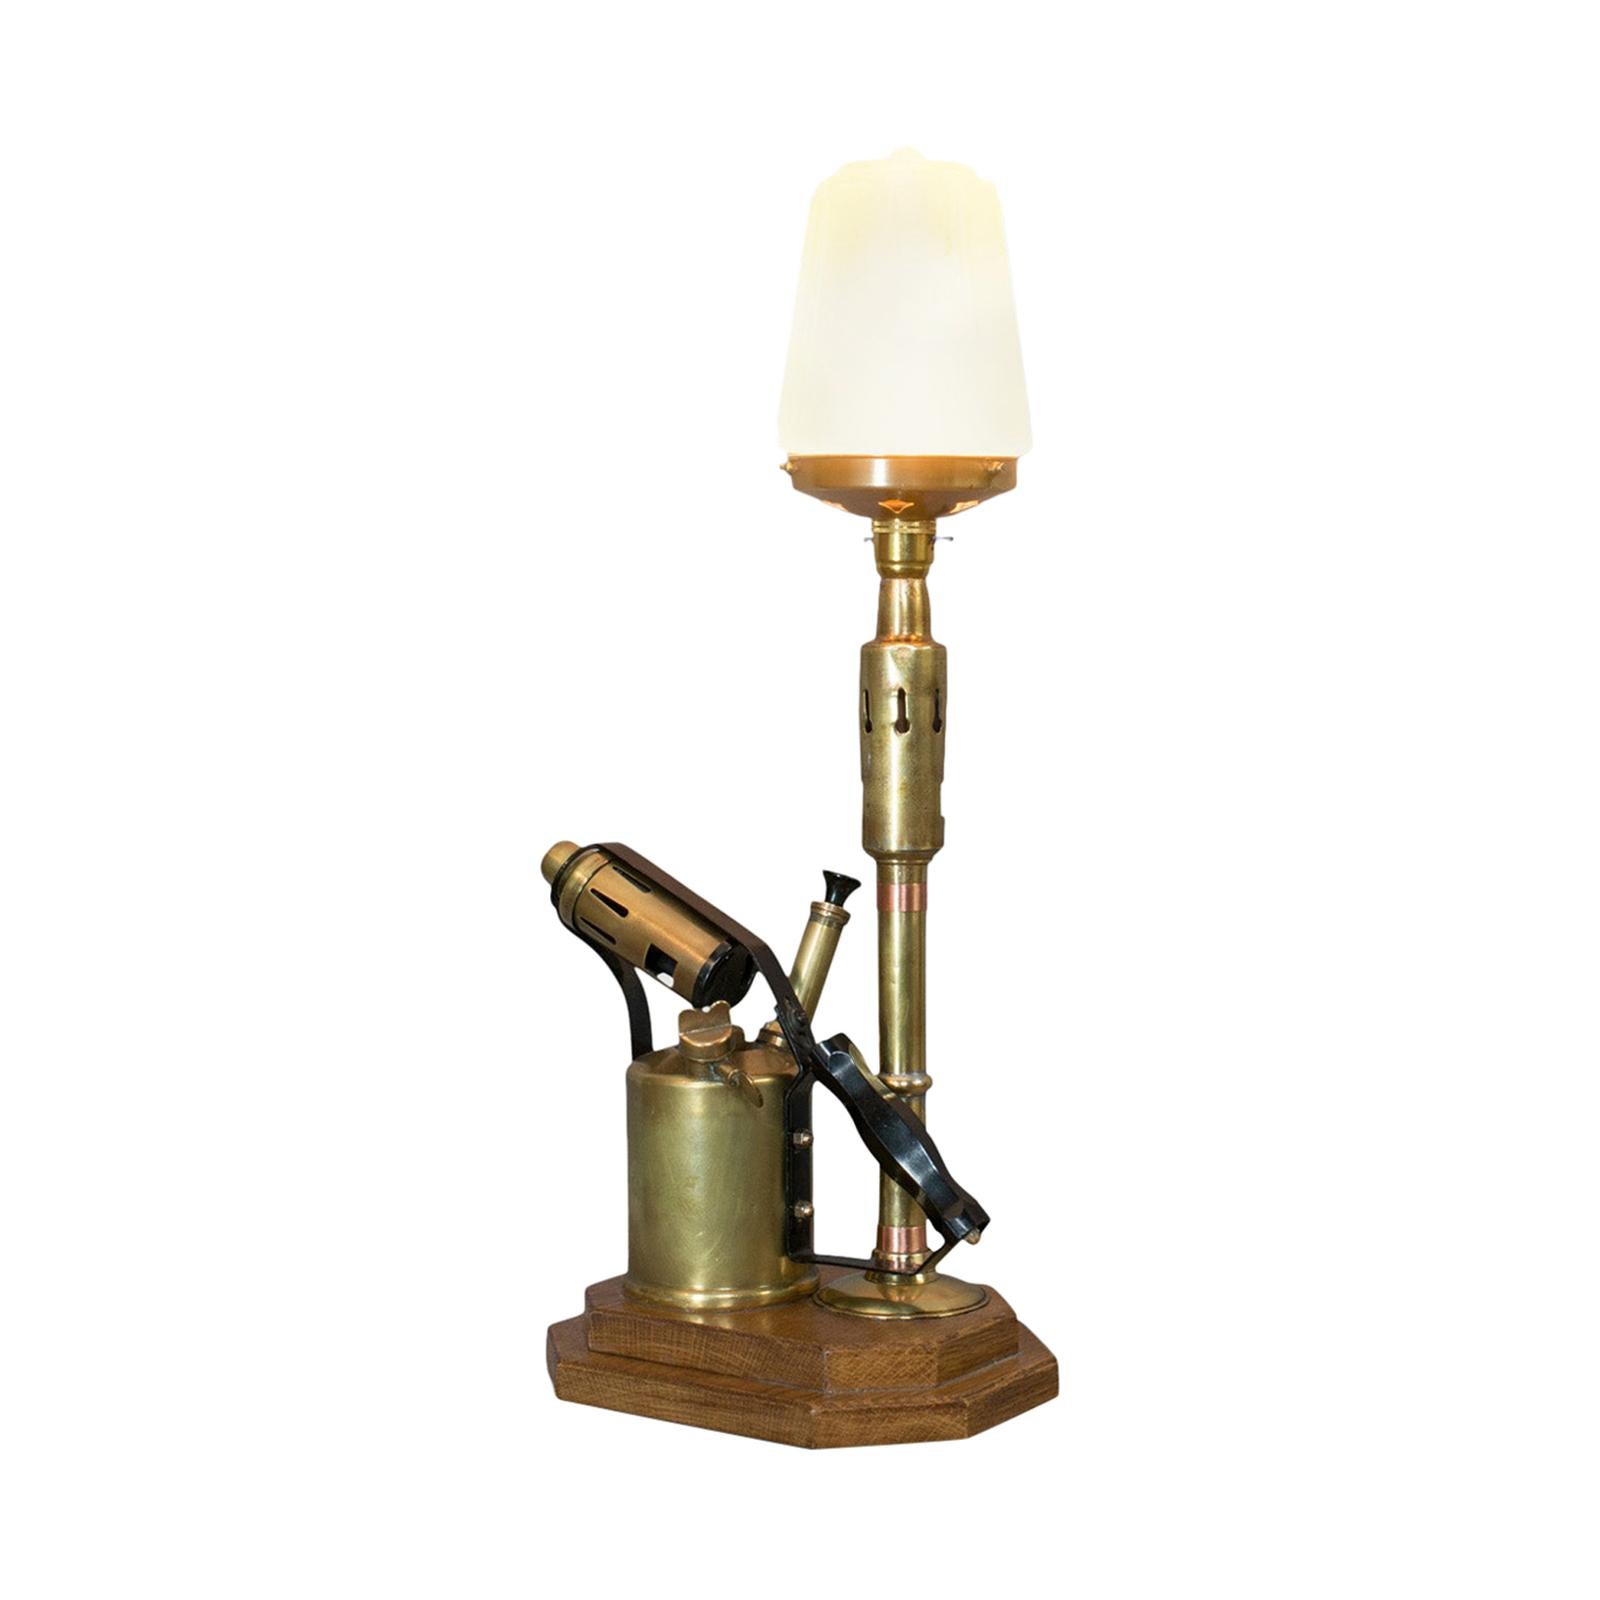 Vintage Decorative Lamp, English, Brass, Blow Torch, Light, Shade, Oak Base For Sale